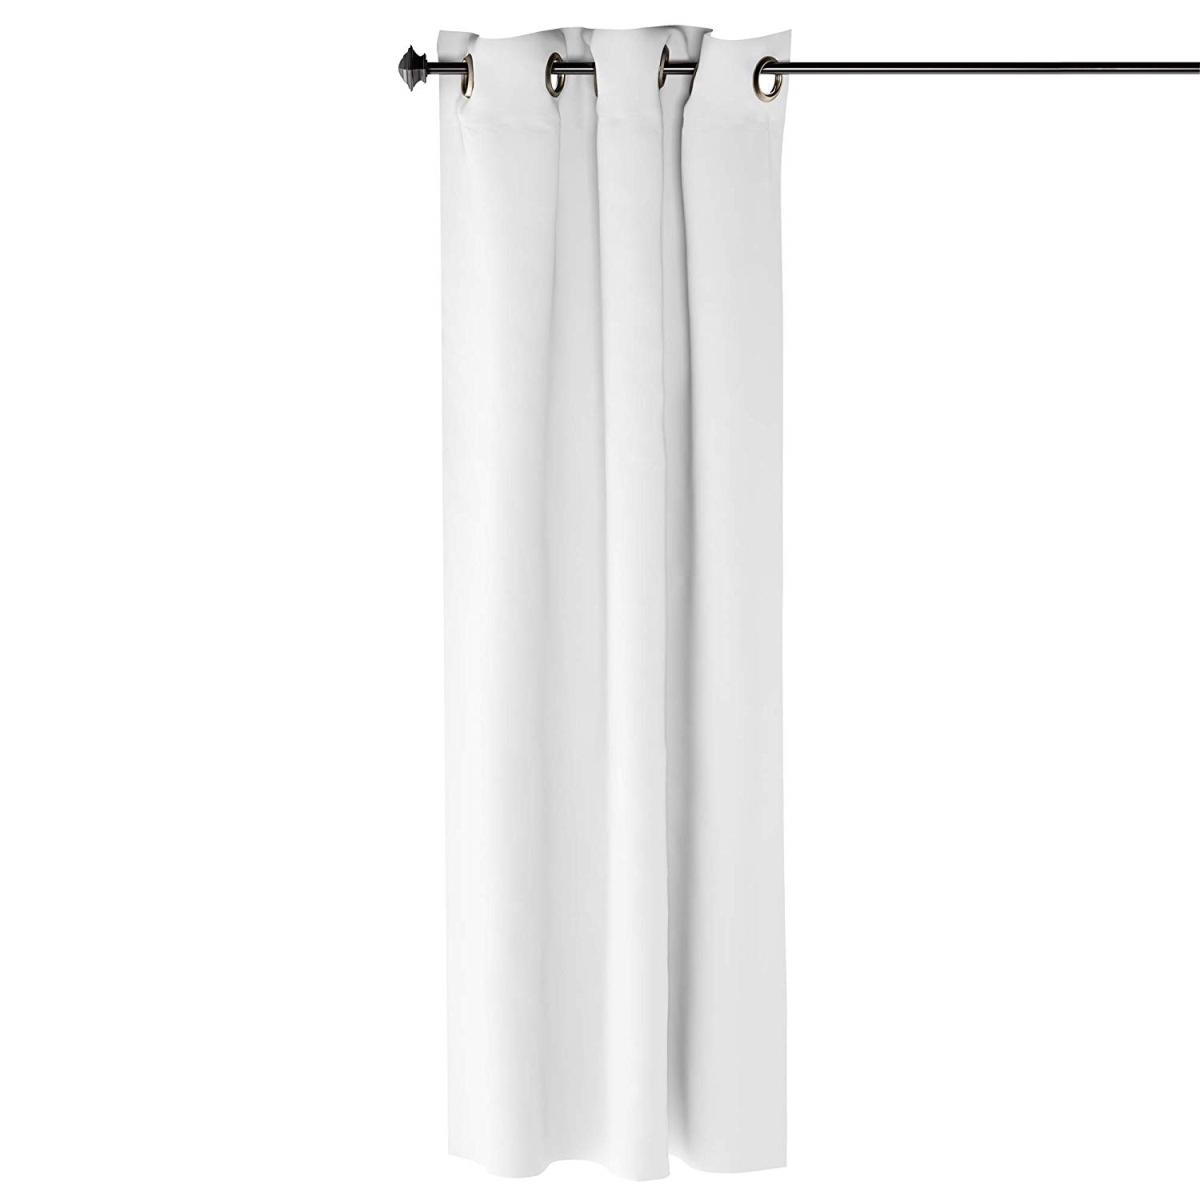 Fc66001wh Collins Blackout Curtain, 42 X 63 In. - 1 Panel - White